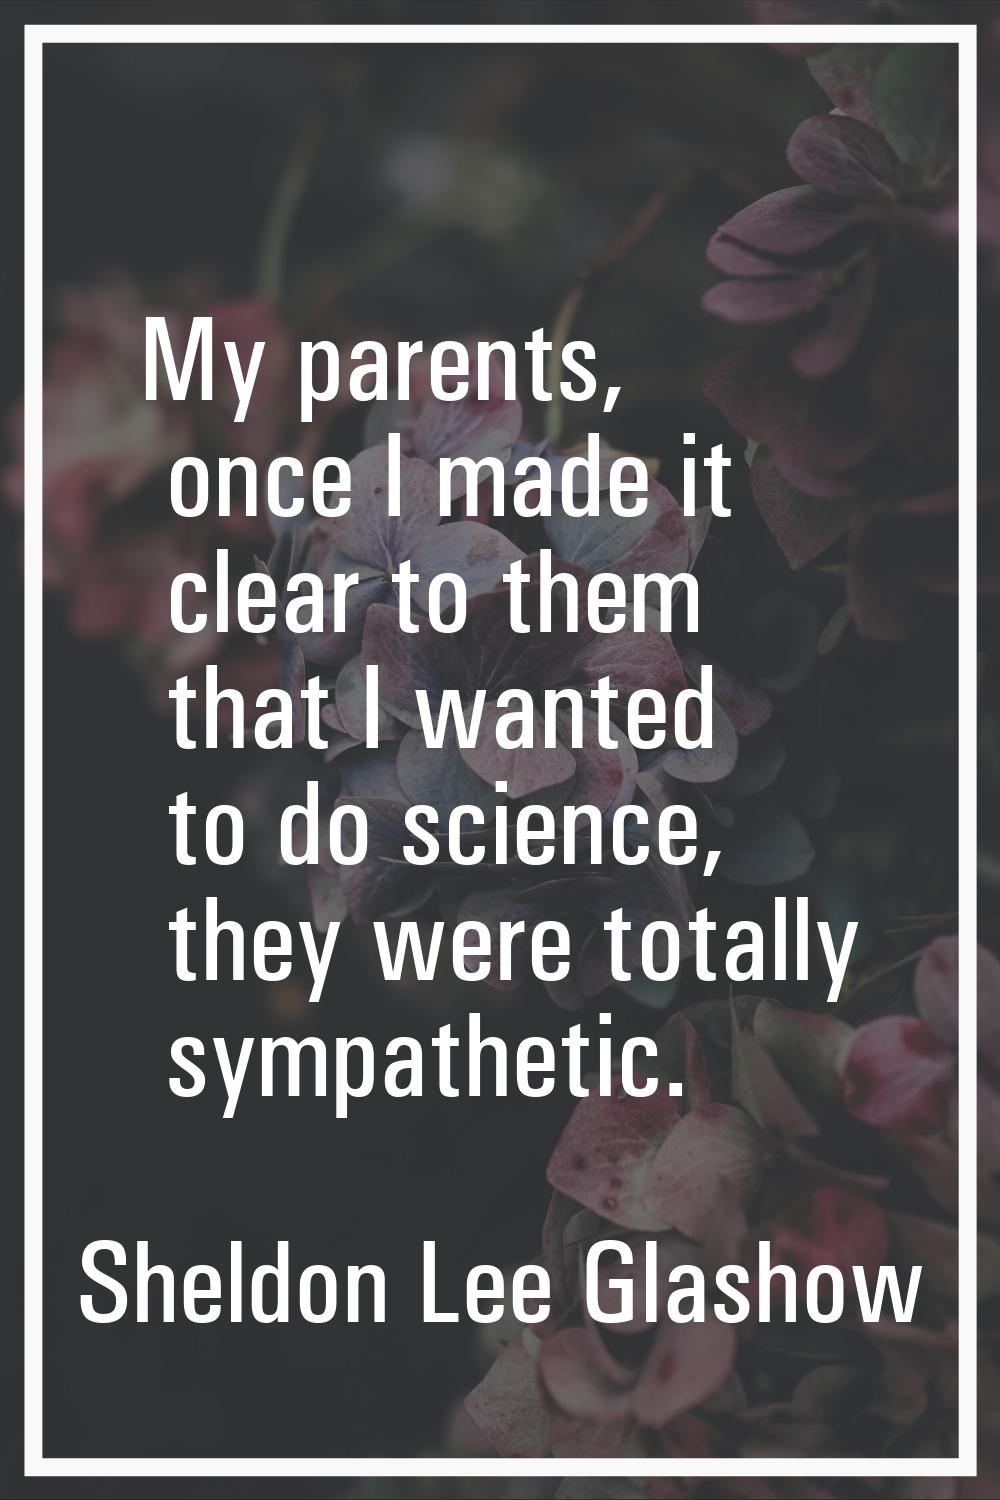 My parents, once I made it clear to them that I wanted to do science, they were totally sympathetic